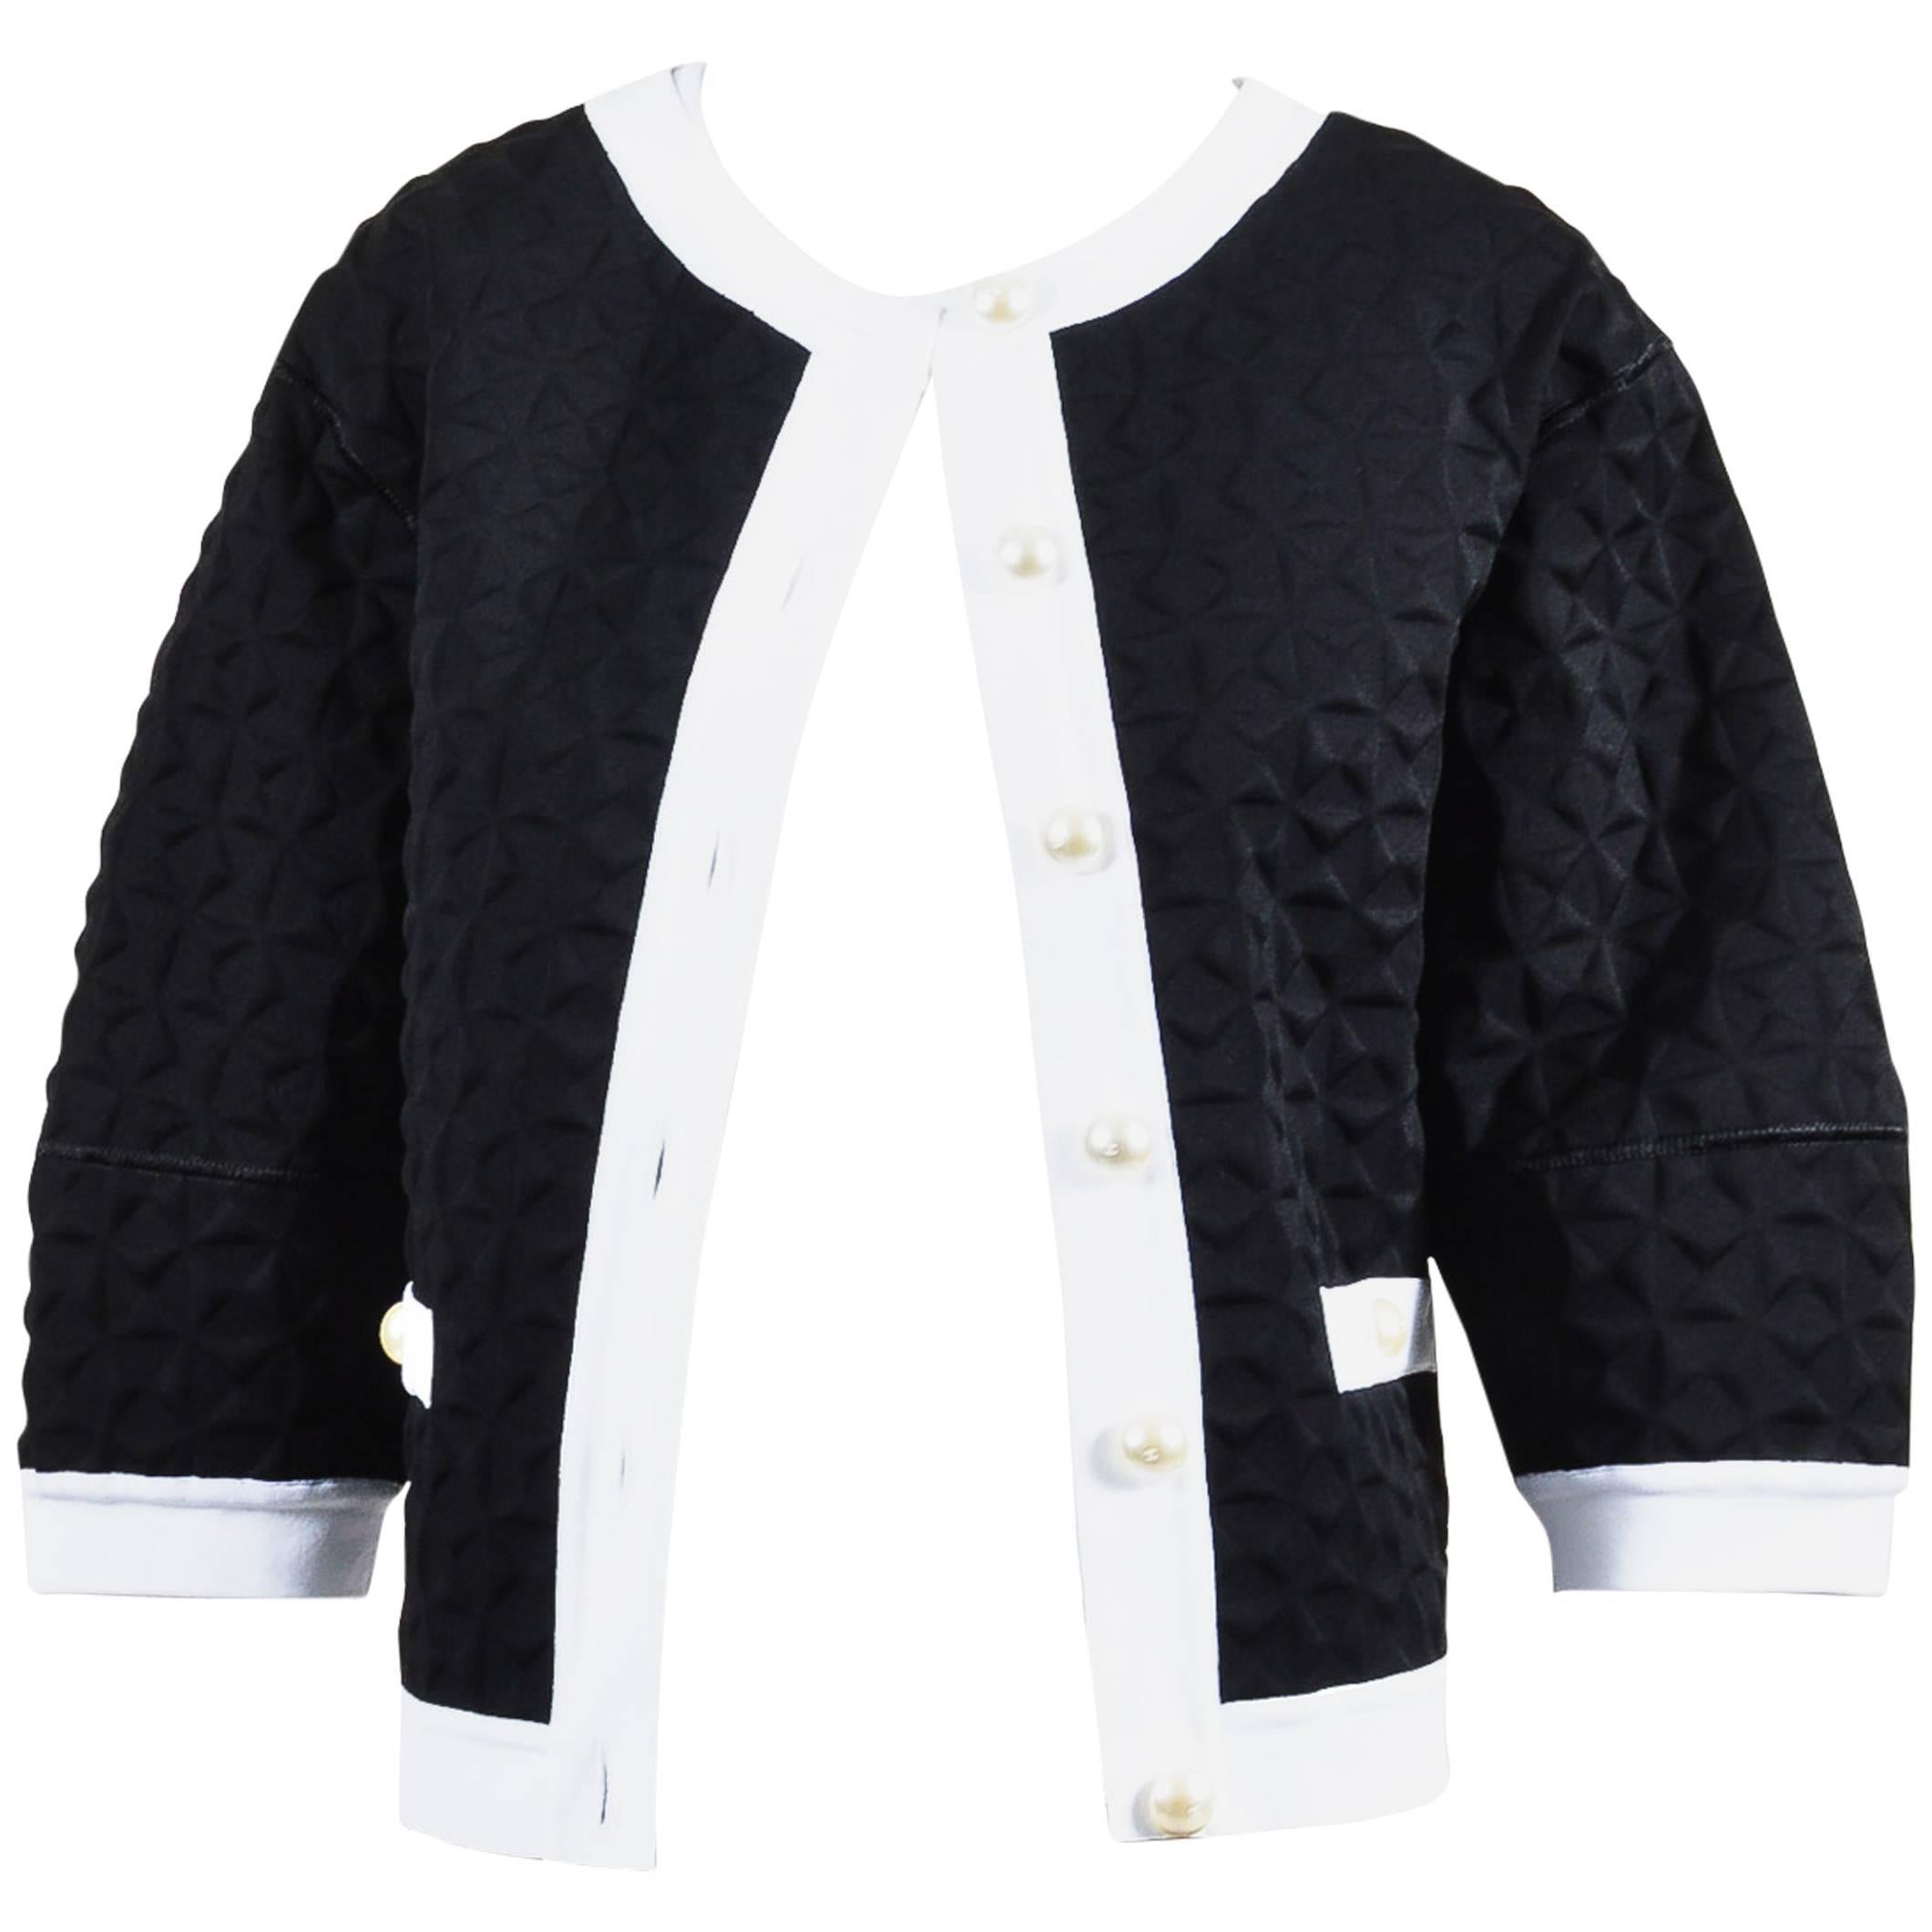 Chanel New With Tag $4245 Black White Textured Faux Pearl Button LS Jacket SZ 40 For Sale